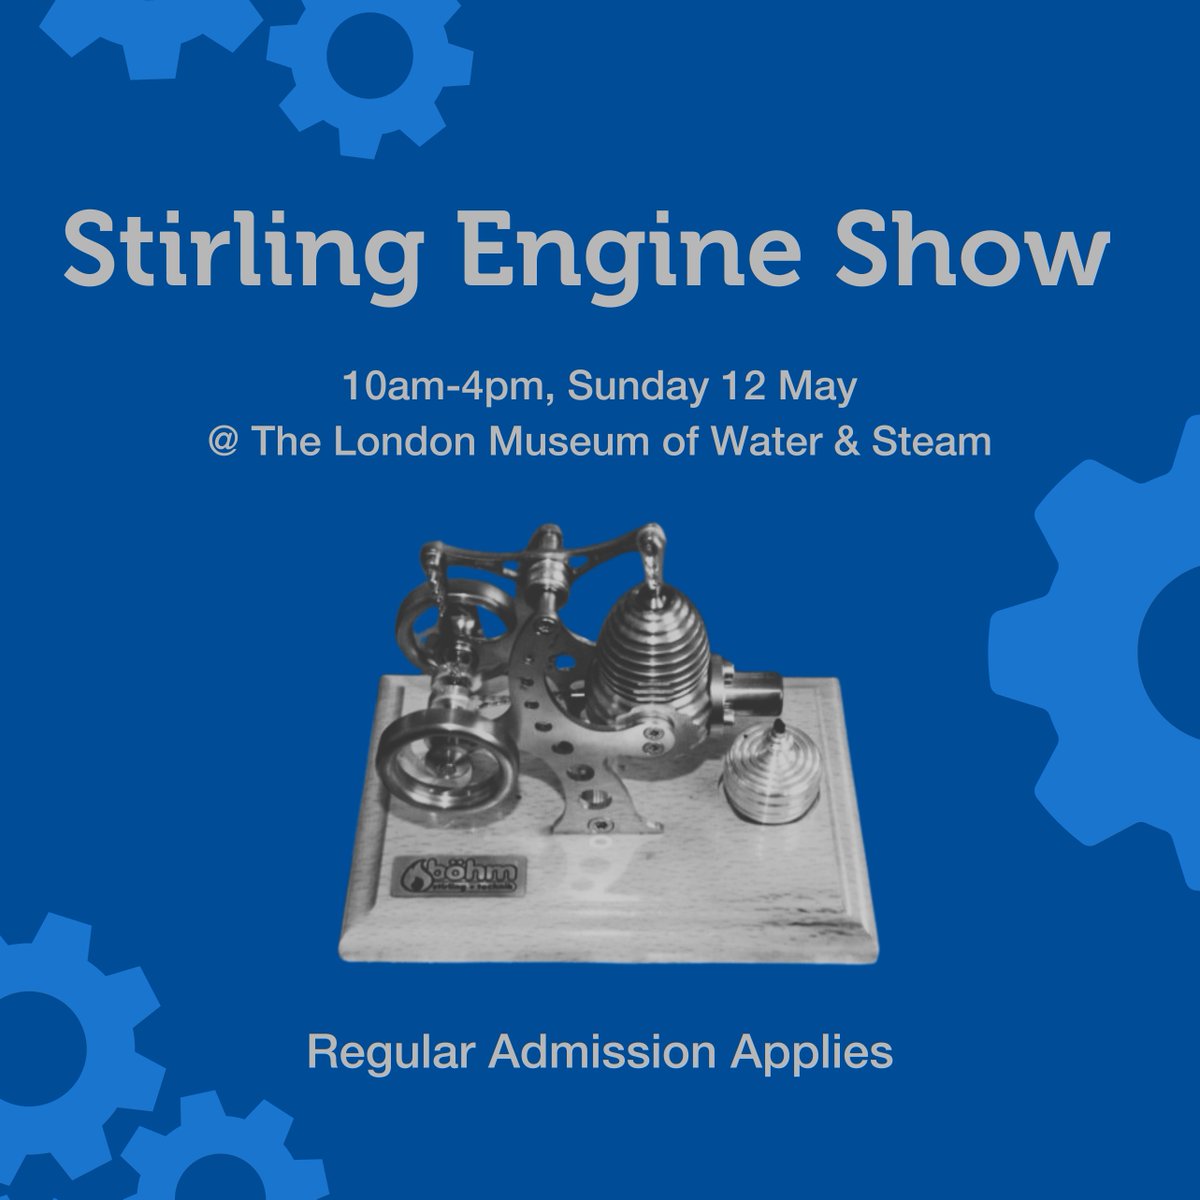 The Stirling Engine Society are at LMWS on Sunday 12 May! Take the opportunity to speak to the engineers who built the engines about how they work and why they are so cool! Event suitable for all ages, regular admission applies. lmws.digitickets.co.uk/event-tickets/…